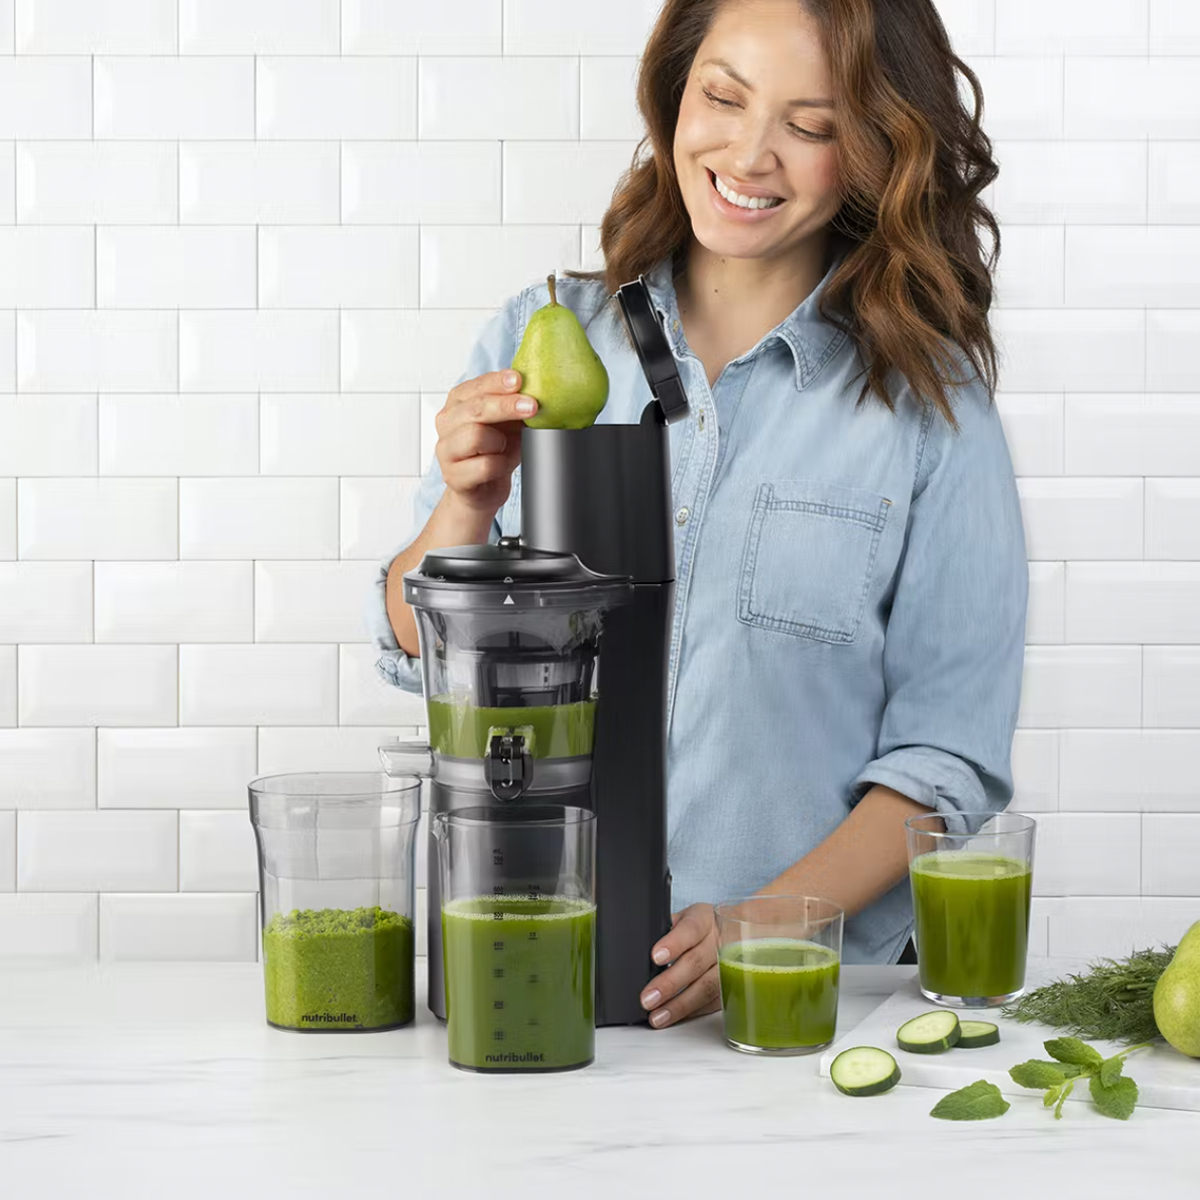 NutriBullet: Our first full-size blenders are here!